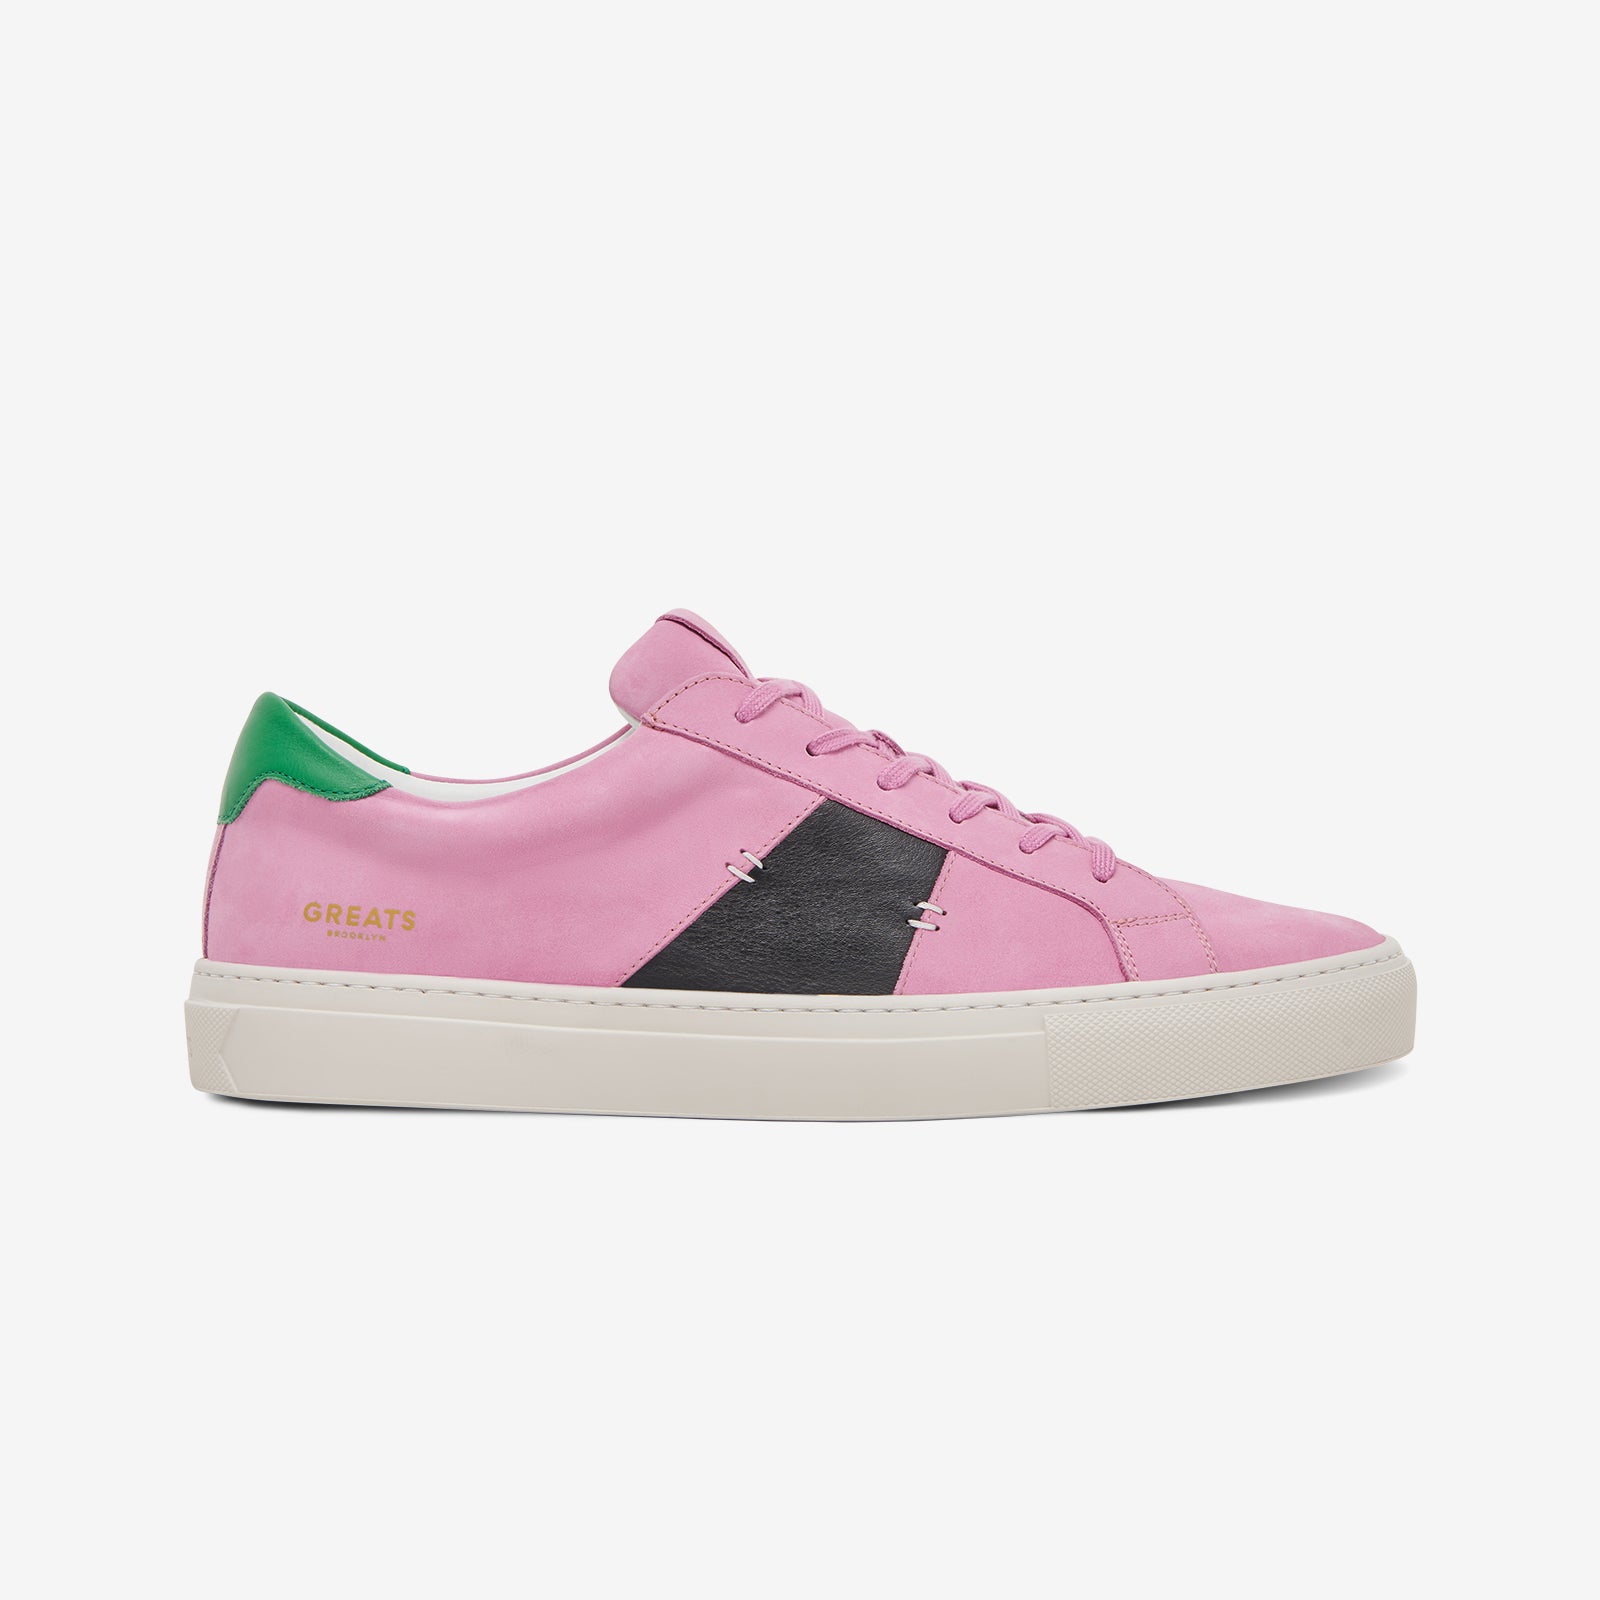 Greats - The Royale 2.0 - Pink - Men's Shoe – GREATS